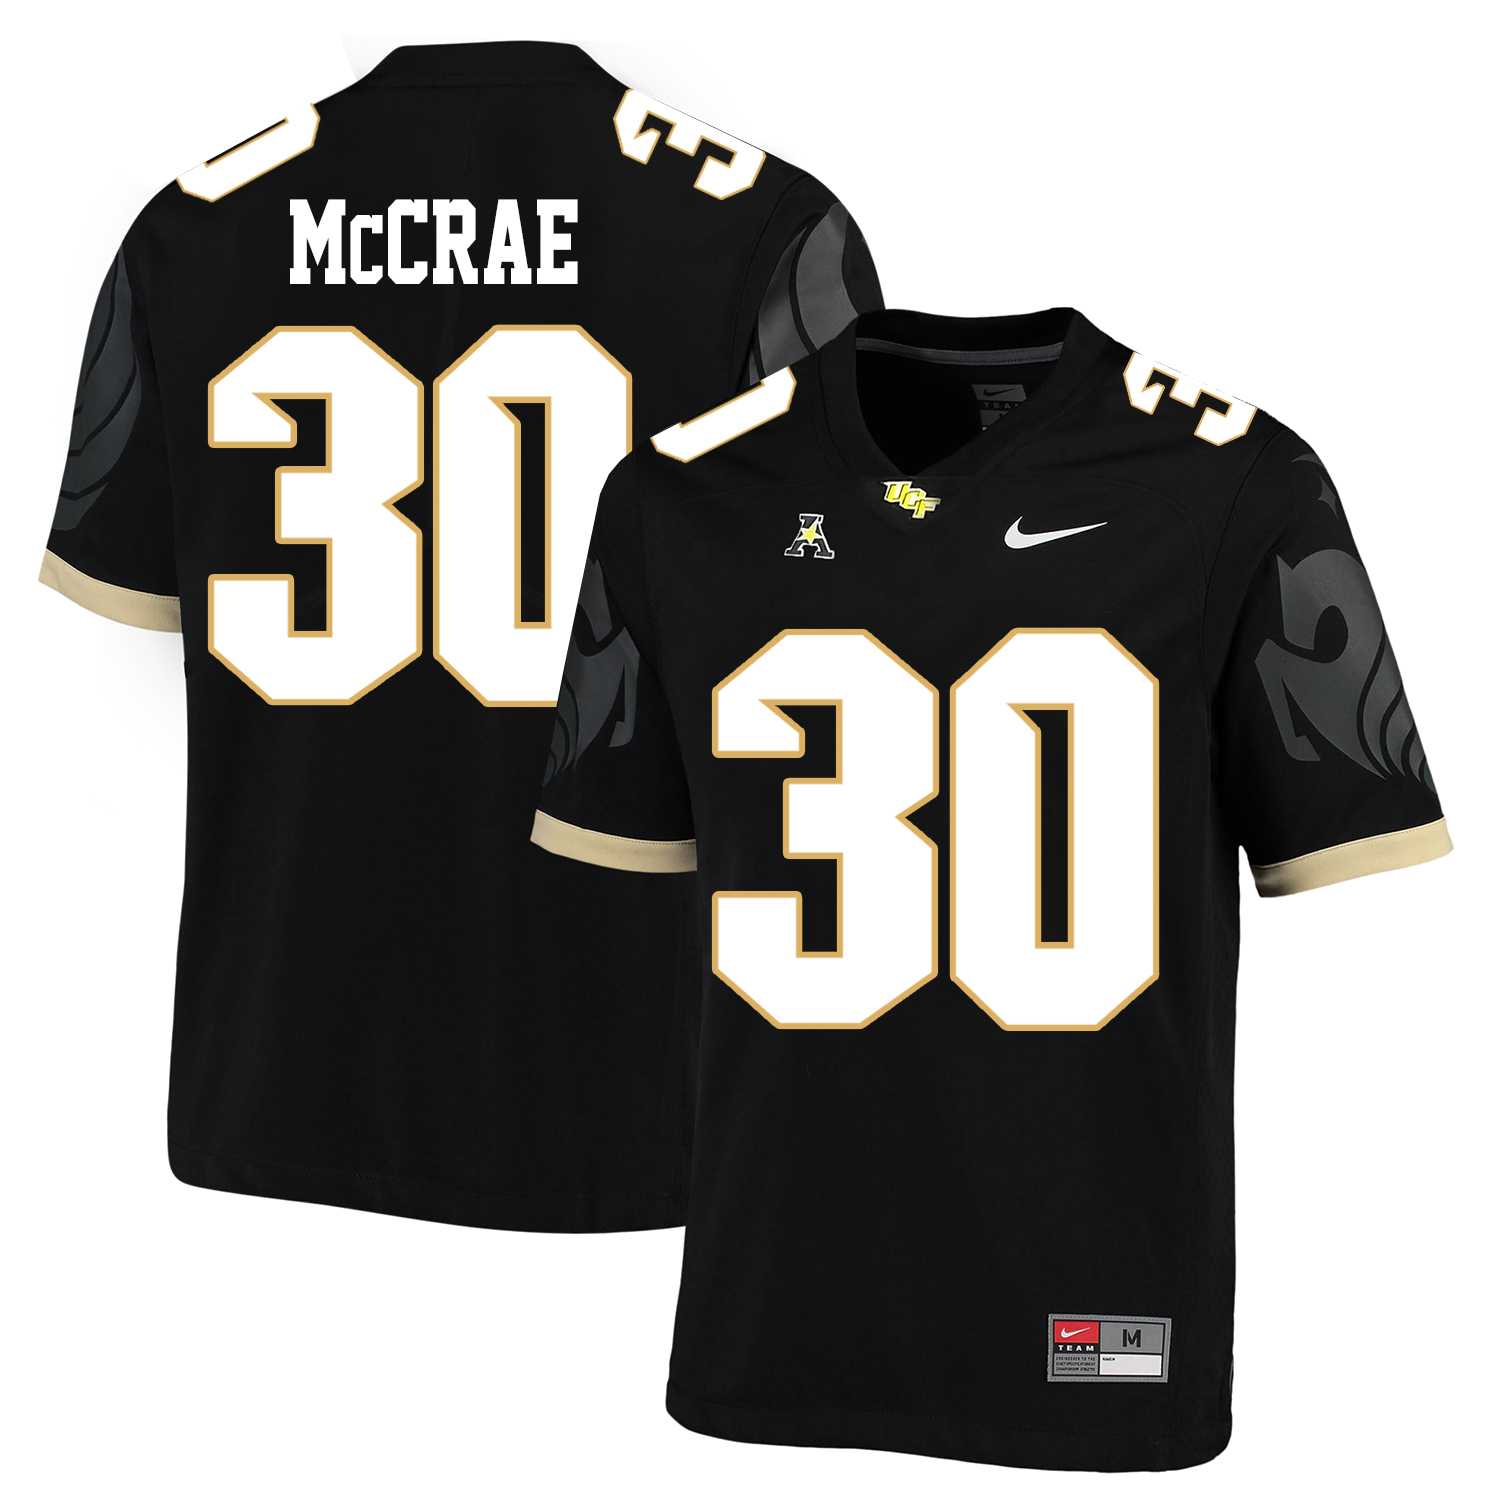 UCF Knights 30 Greg McCrae Black College Football Jersey DingZhi